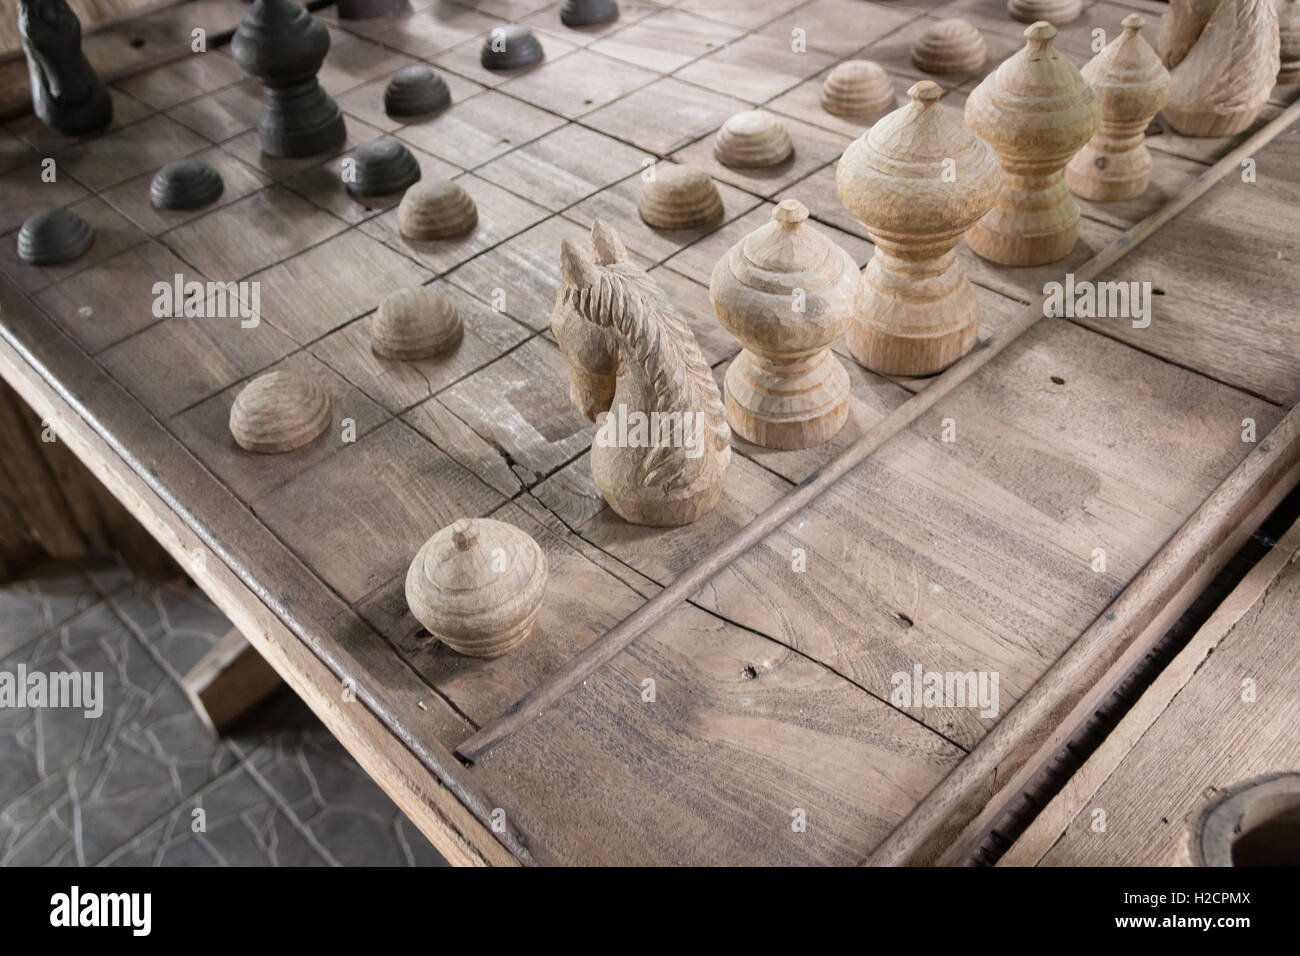 brown chess board with figures on a wooden table in a cafe, playing chess  Stock Photo - Alamy